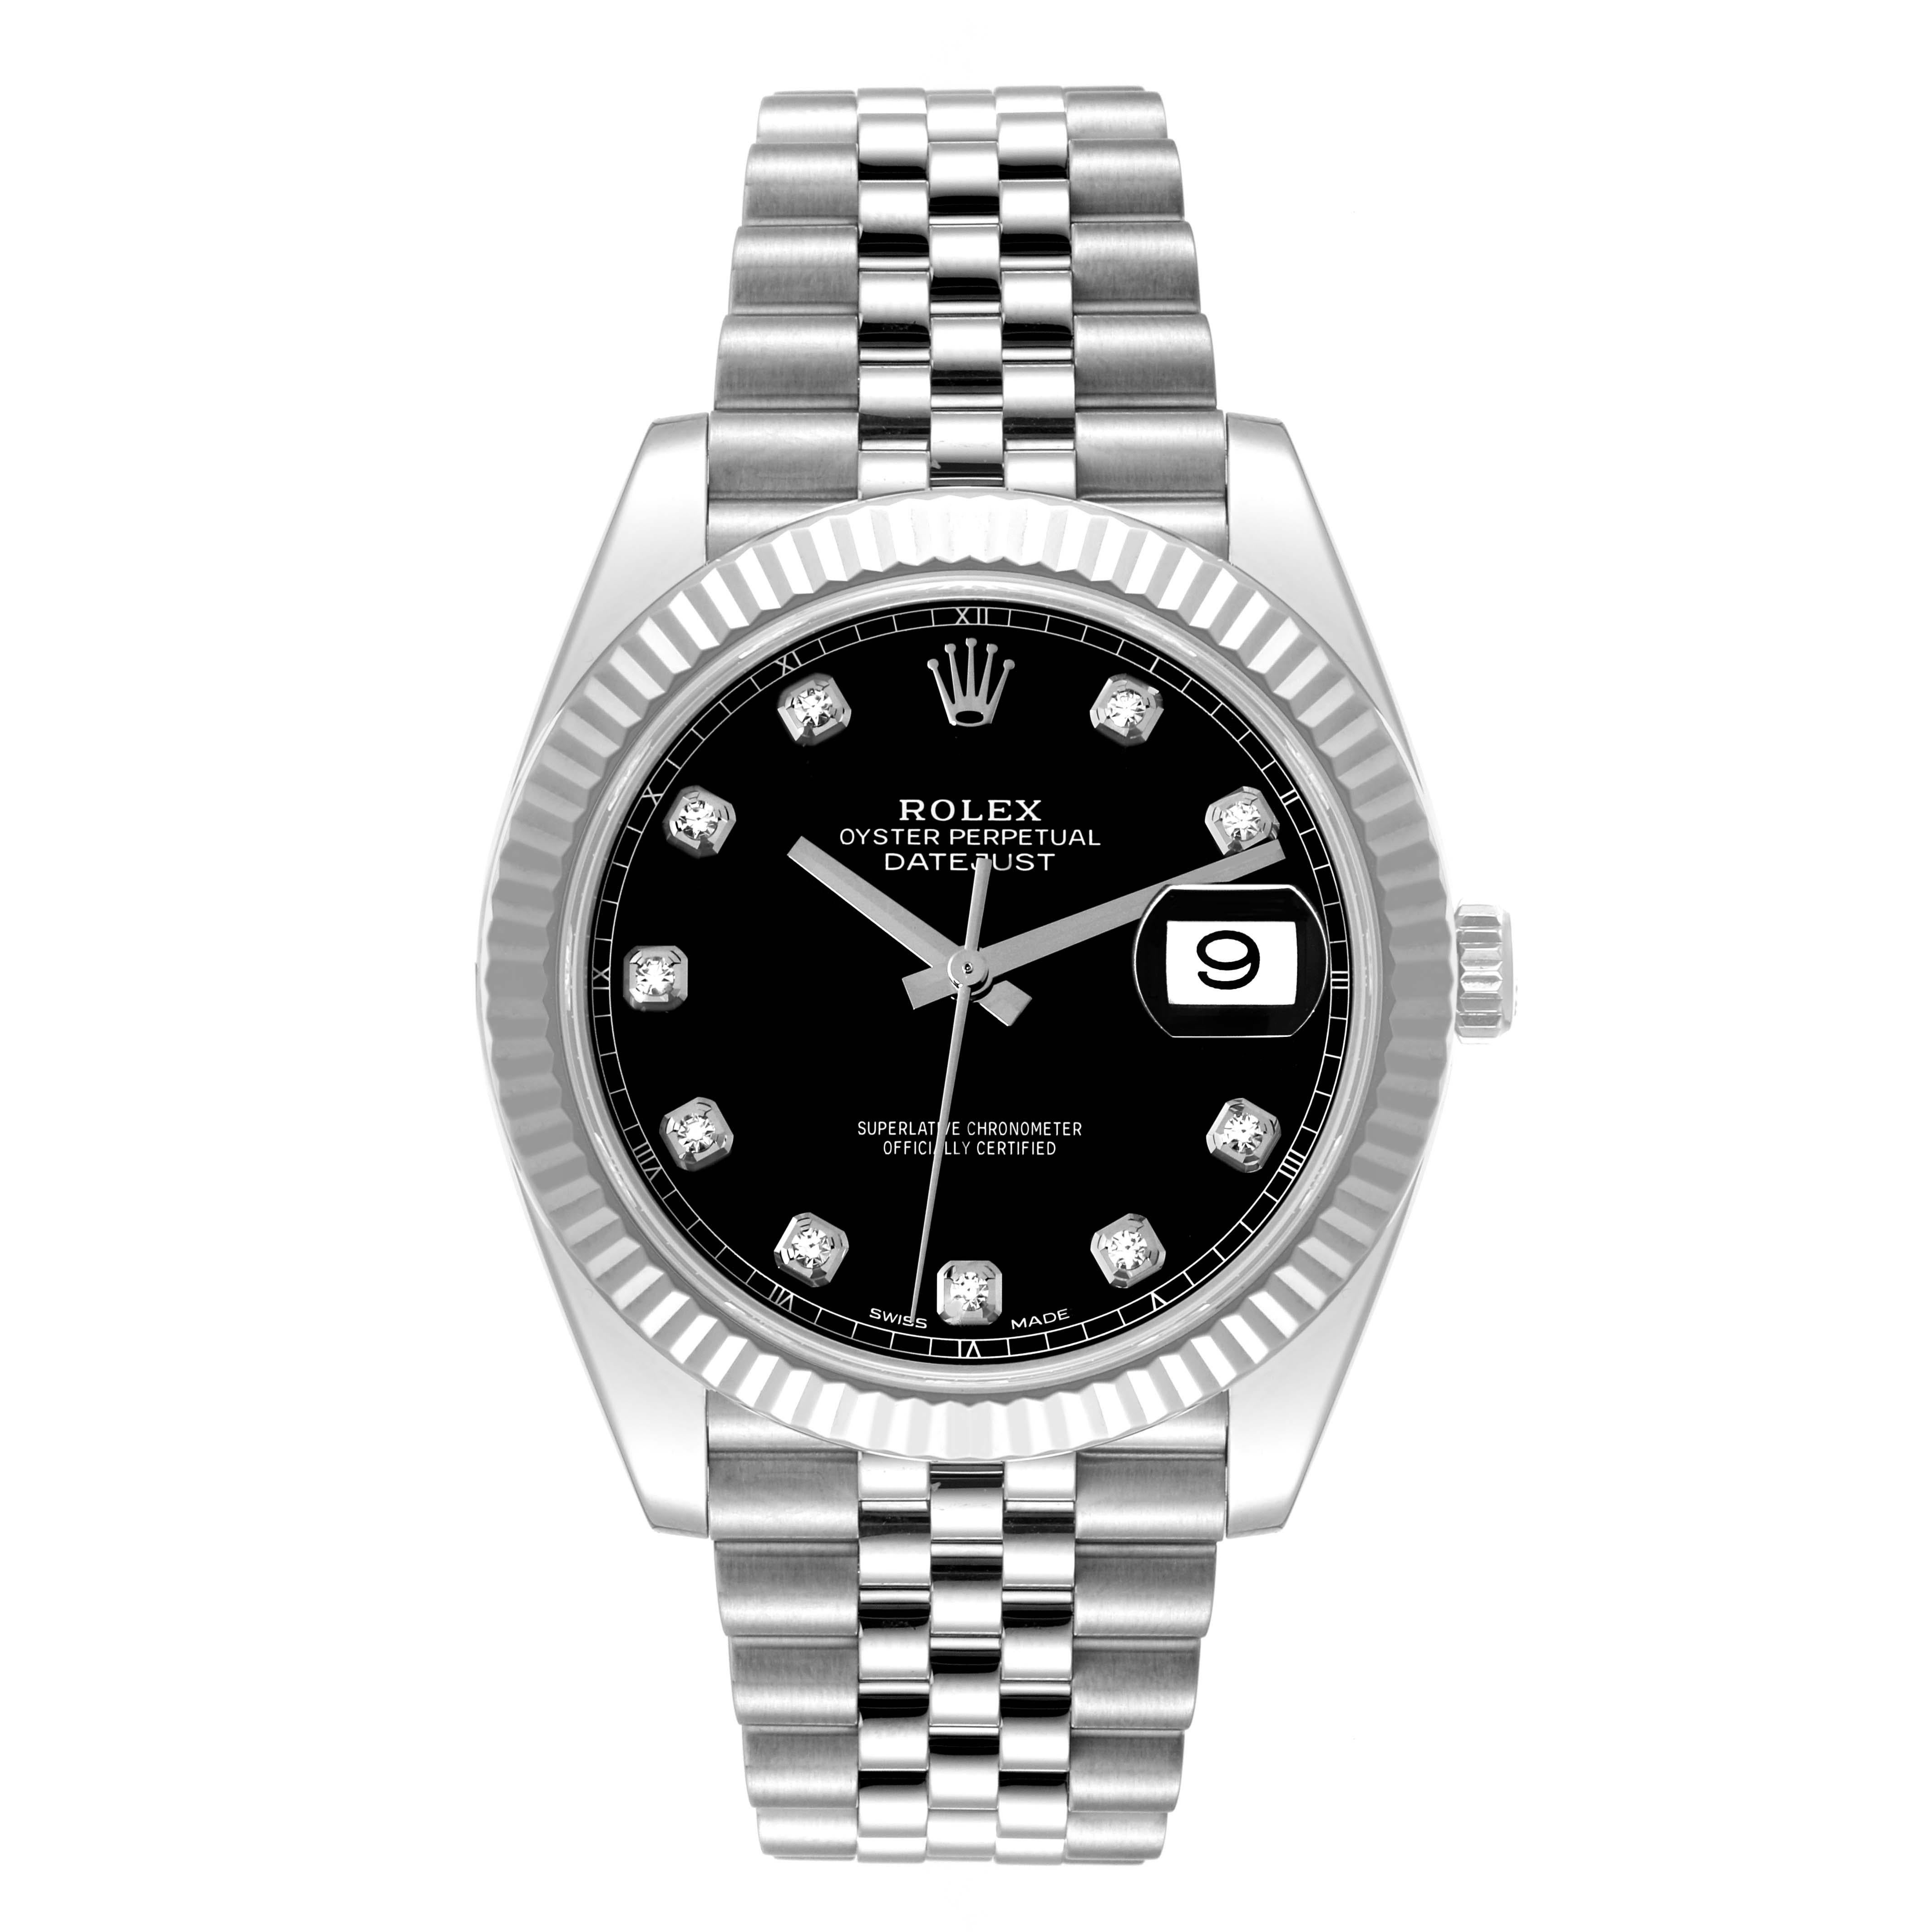 Rolex Datejust 41 Steel White Gold Diamond Dial Mens Watch 126334 Box Card. Officially certified chronometer automatic self-winding movement. Stainless steel case 41 mm in diameter. Rolex logo on a crown. 18K white gold fluted bezel. Scratch